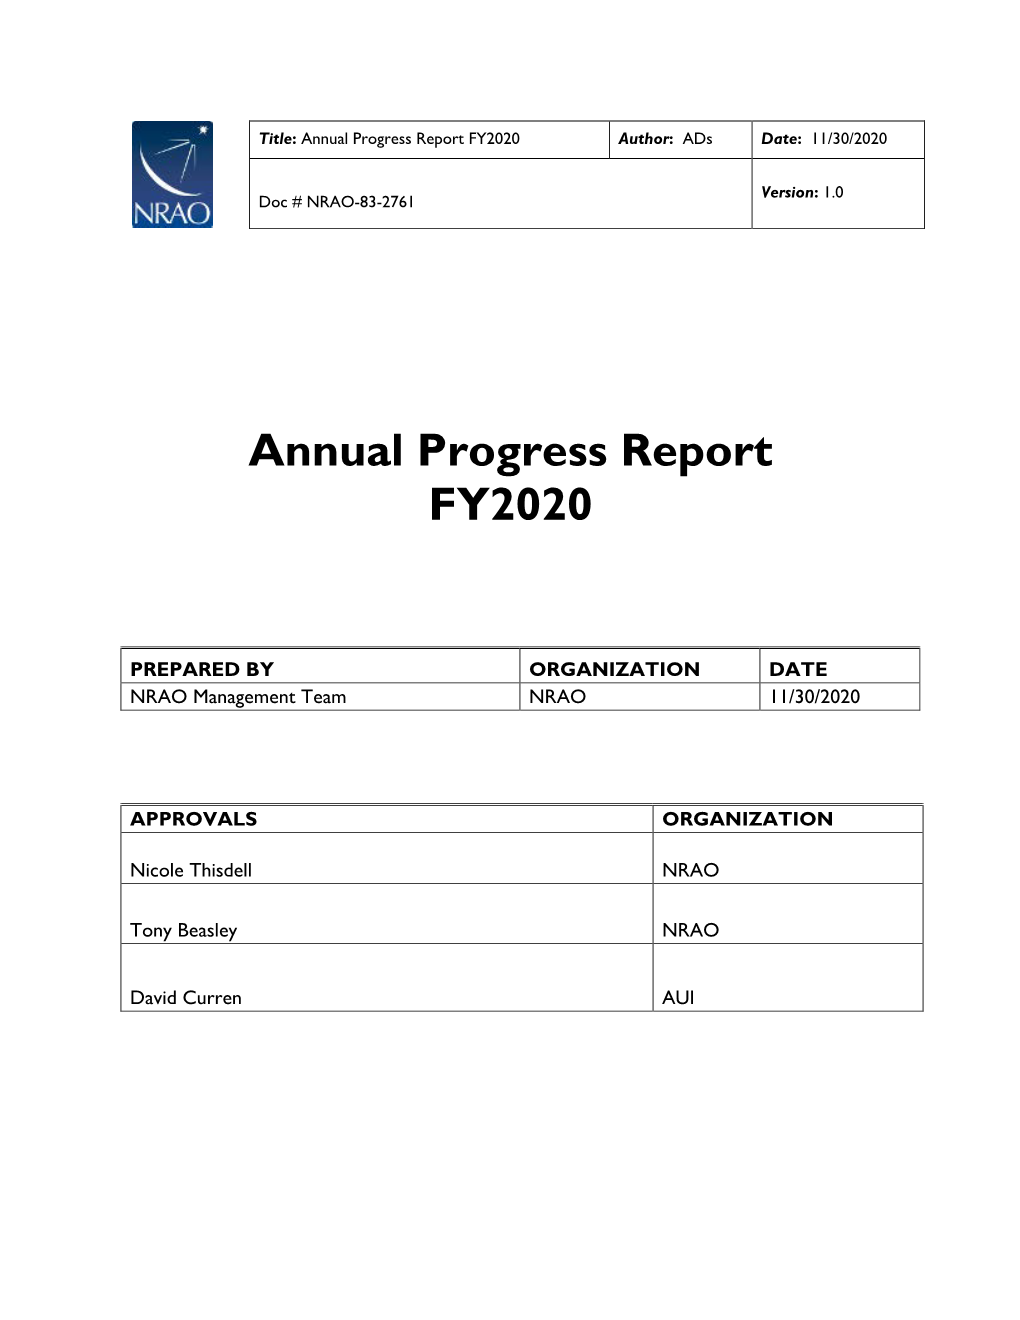 Annual Progress Report FY2020 Author: Ads Date: 11/30/2020